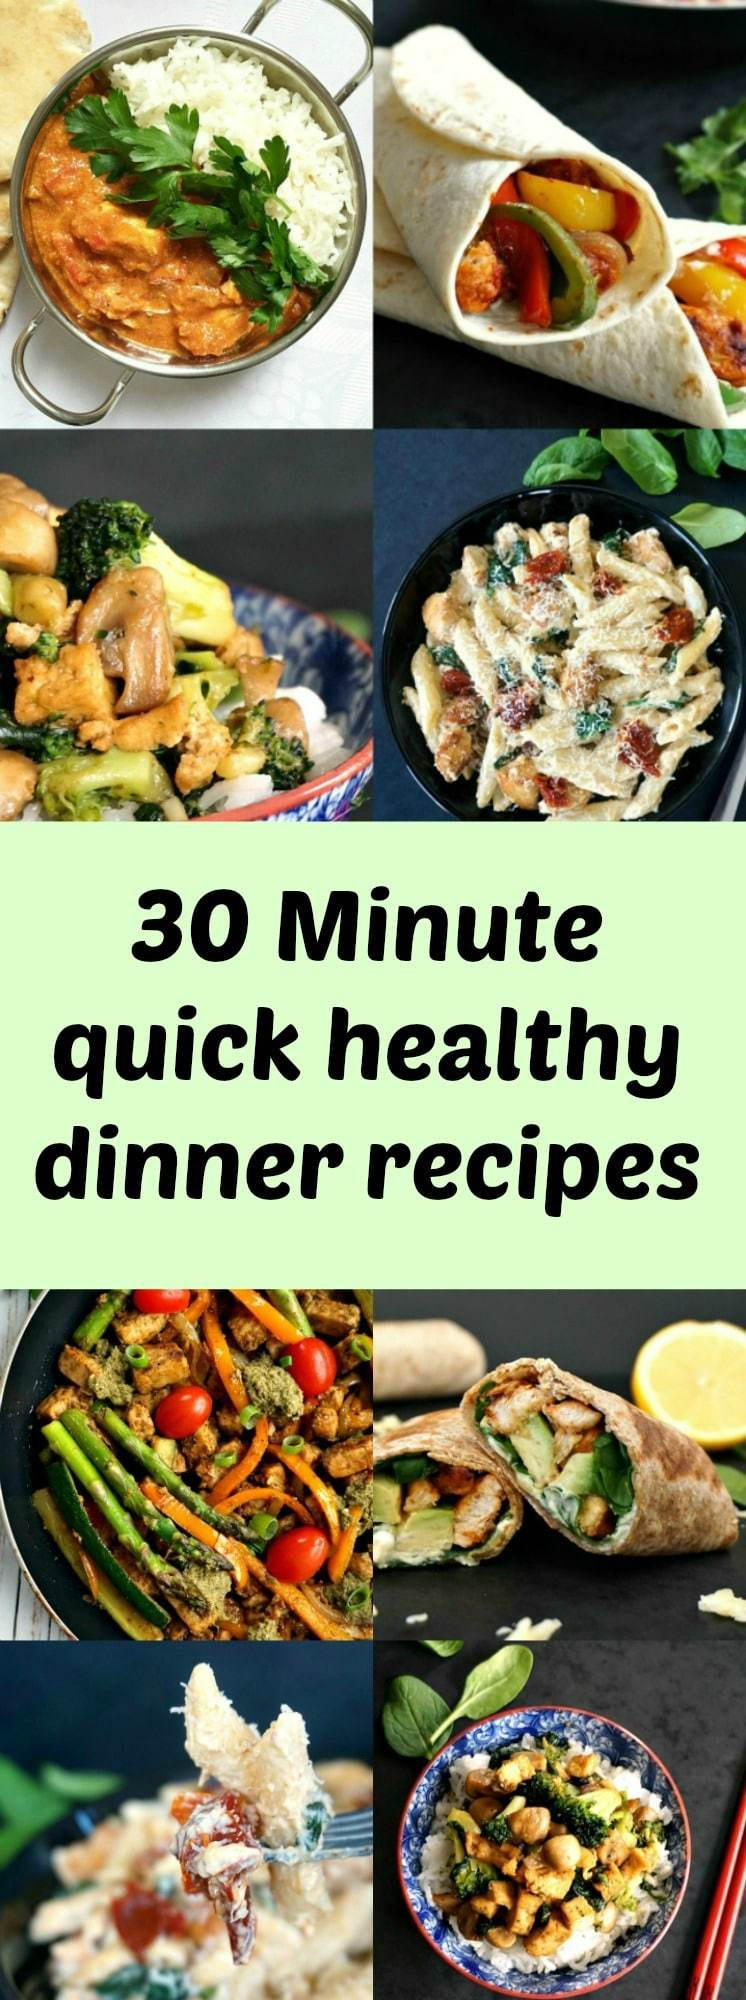 Healthy 30 Minute Dinners
 Top 28 30 Minute Dinner Recipes pineapple chicken 30